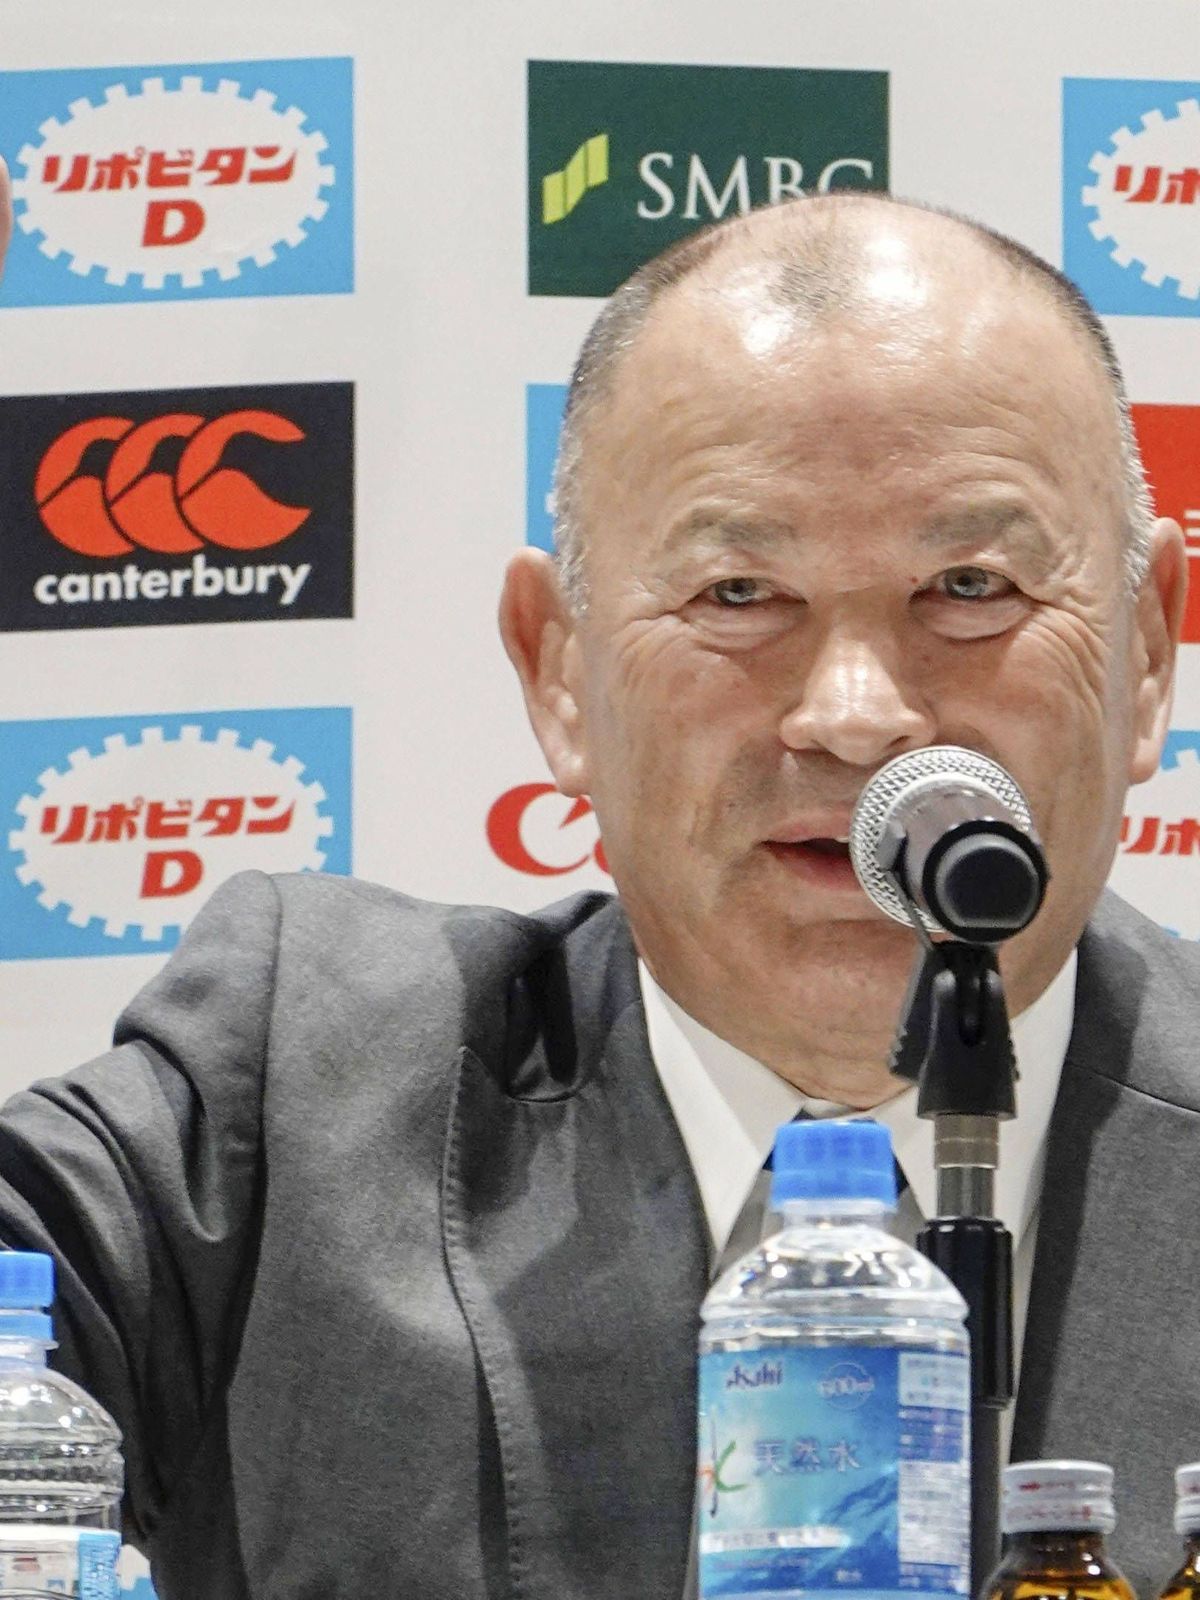 Rugby: Jones to lead Brave Blossoms again Eddie Jones gestures at a press conference, PK, Pressekonferenz in Tokyo on Dec. 14, 2023, as the 63-year-old is introduced by the Japan Rugby Football Uni...